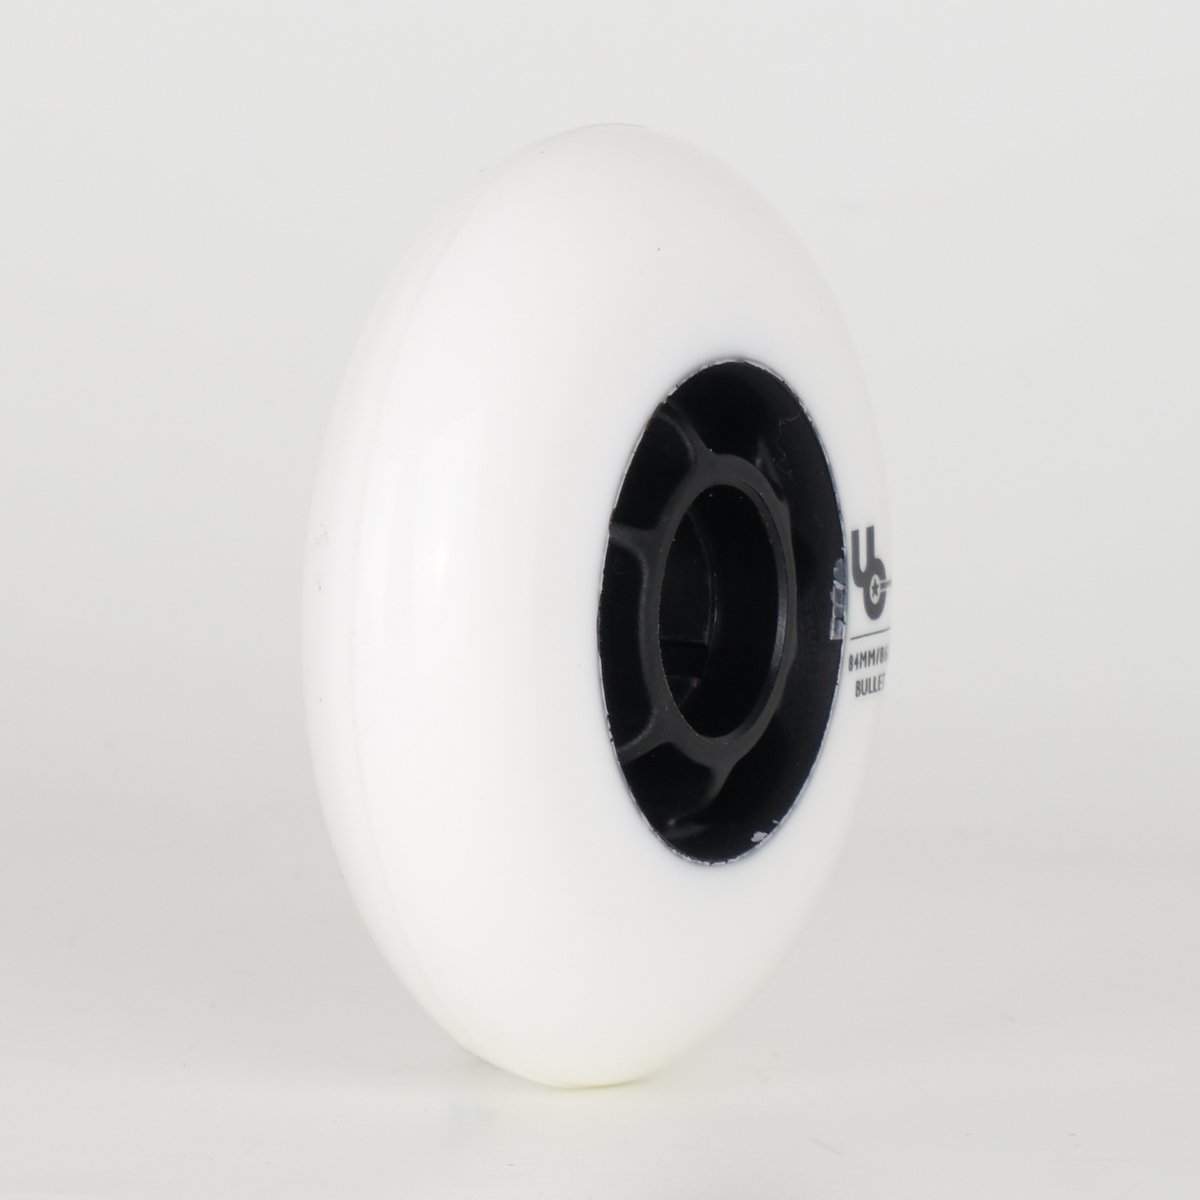 Undercover Team Wheels 84mm / 86a - White - Individual Wheels-Undercover Wheels-84mm,atcUpsellCol:upsellwheels,white